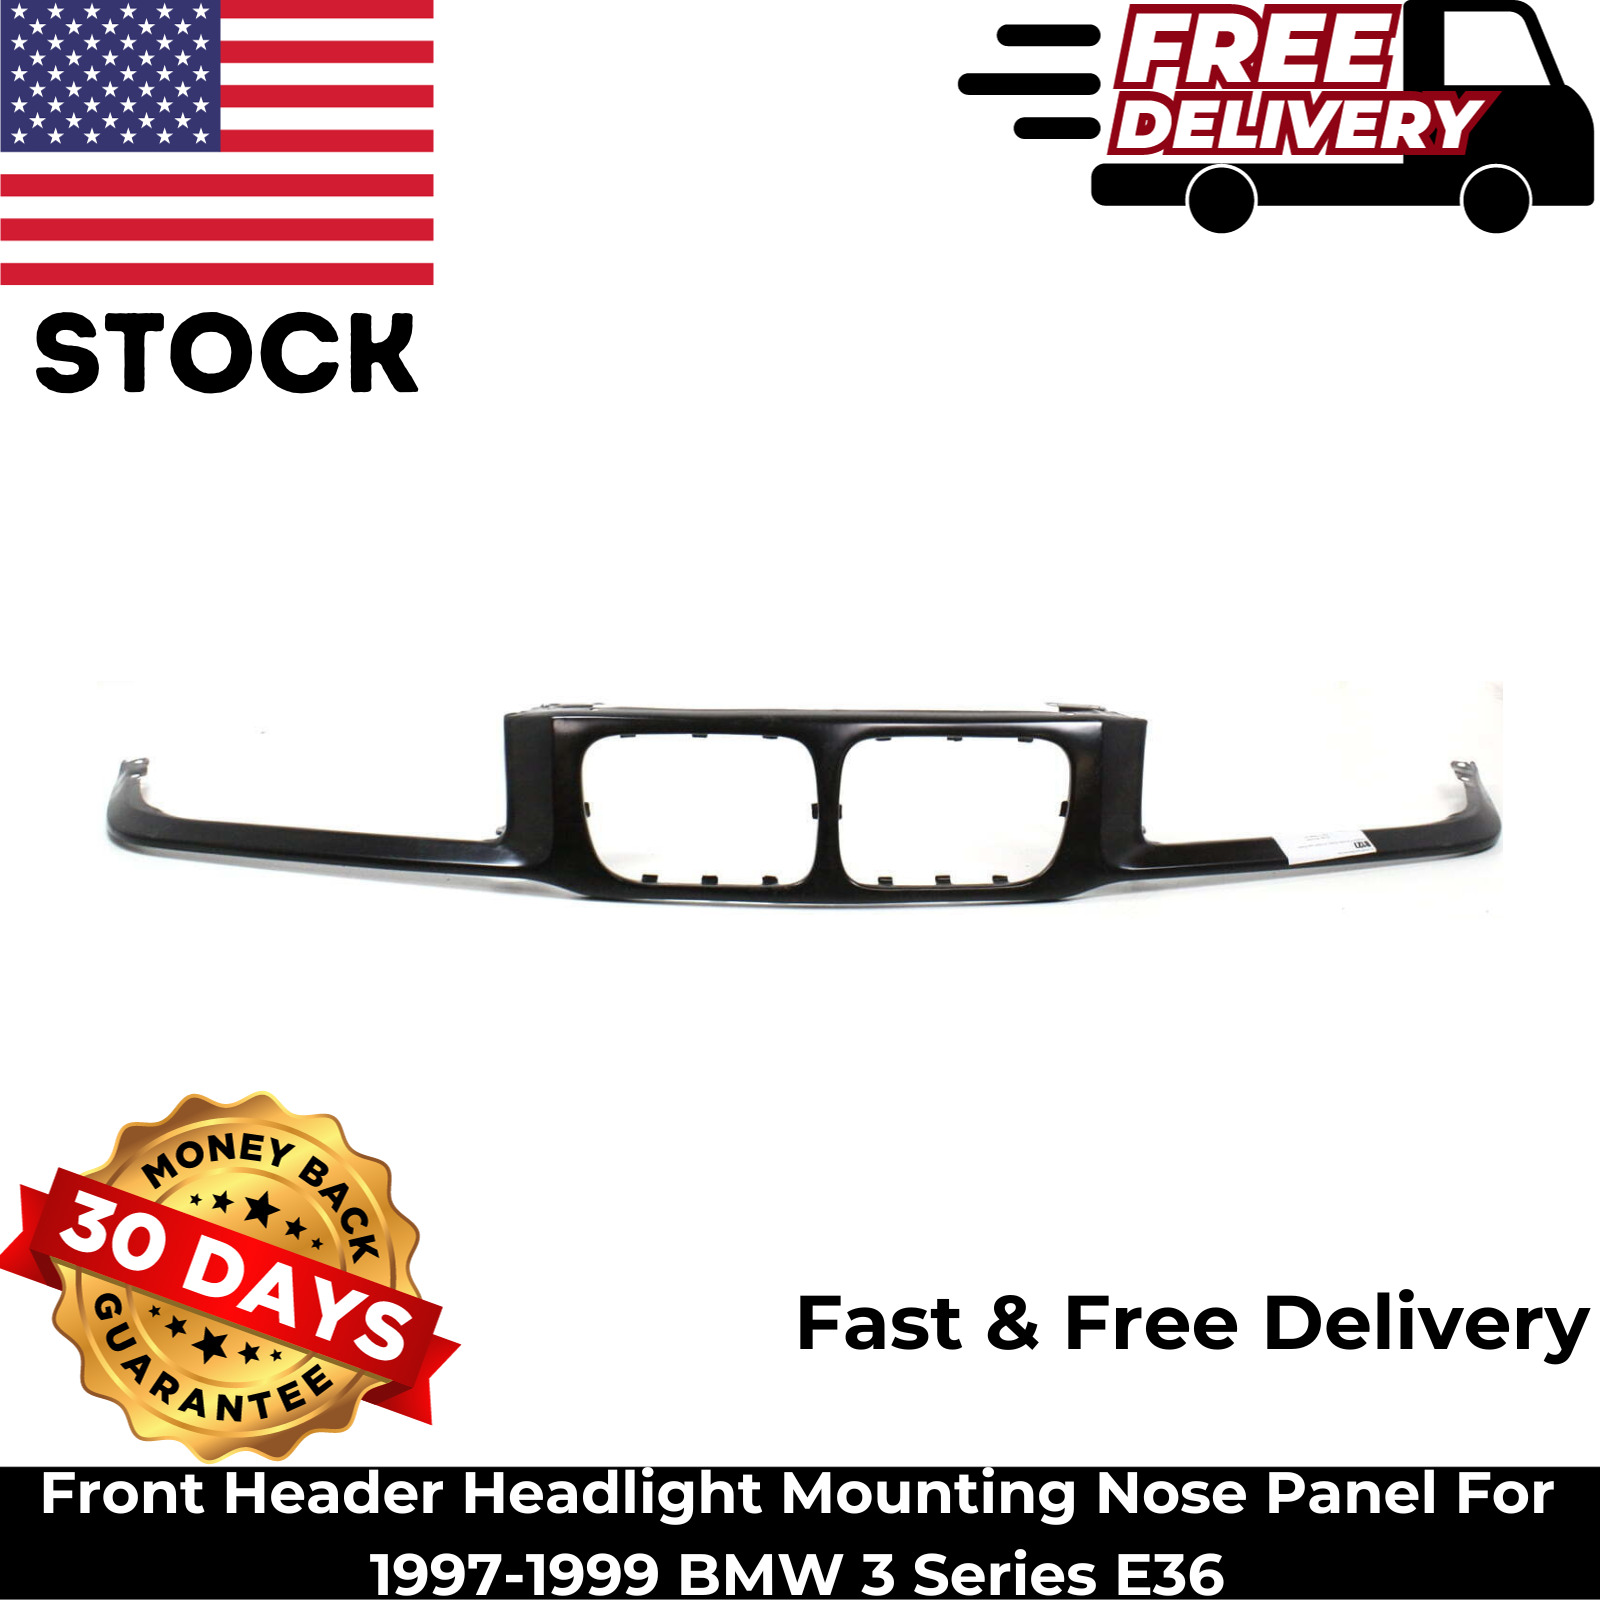 Front Header Headlight Mounting Nose Panel For 1997-1999 BMW 3 Series E36